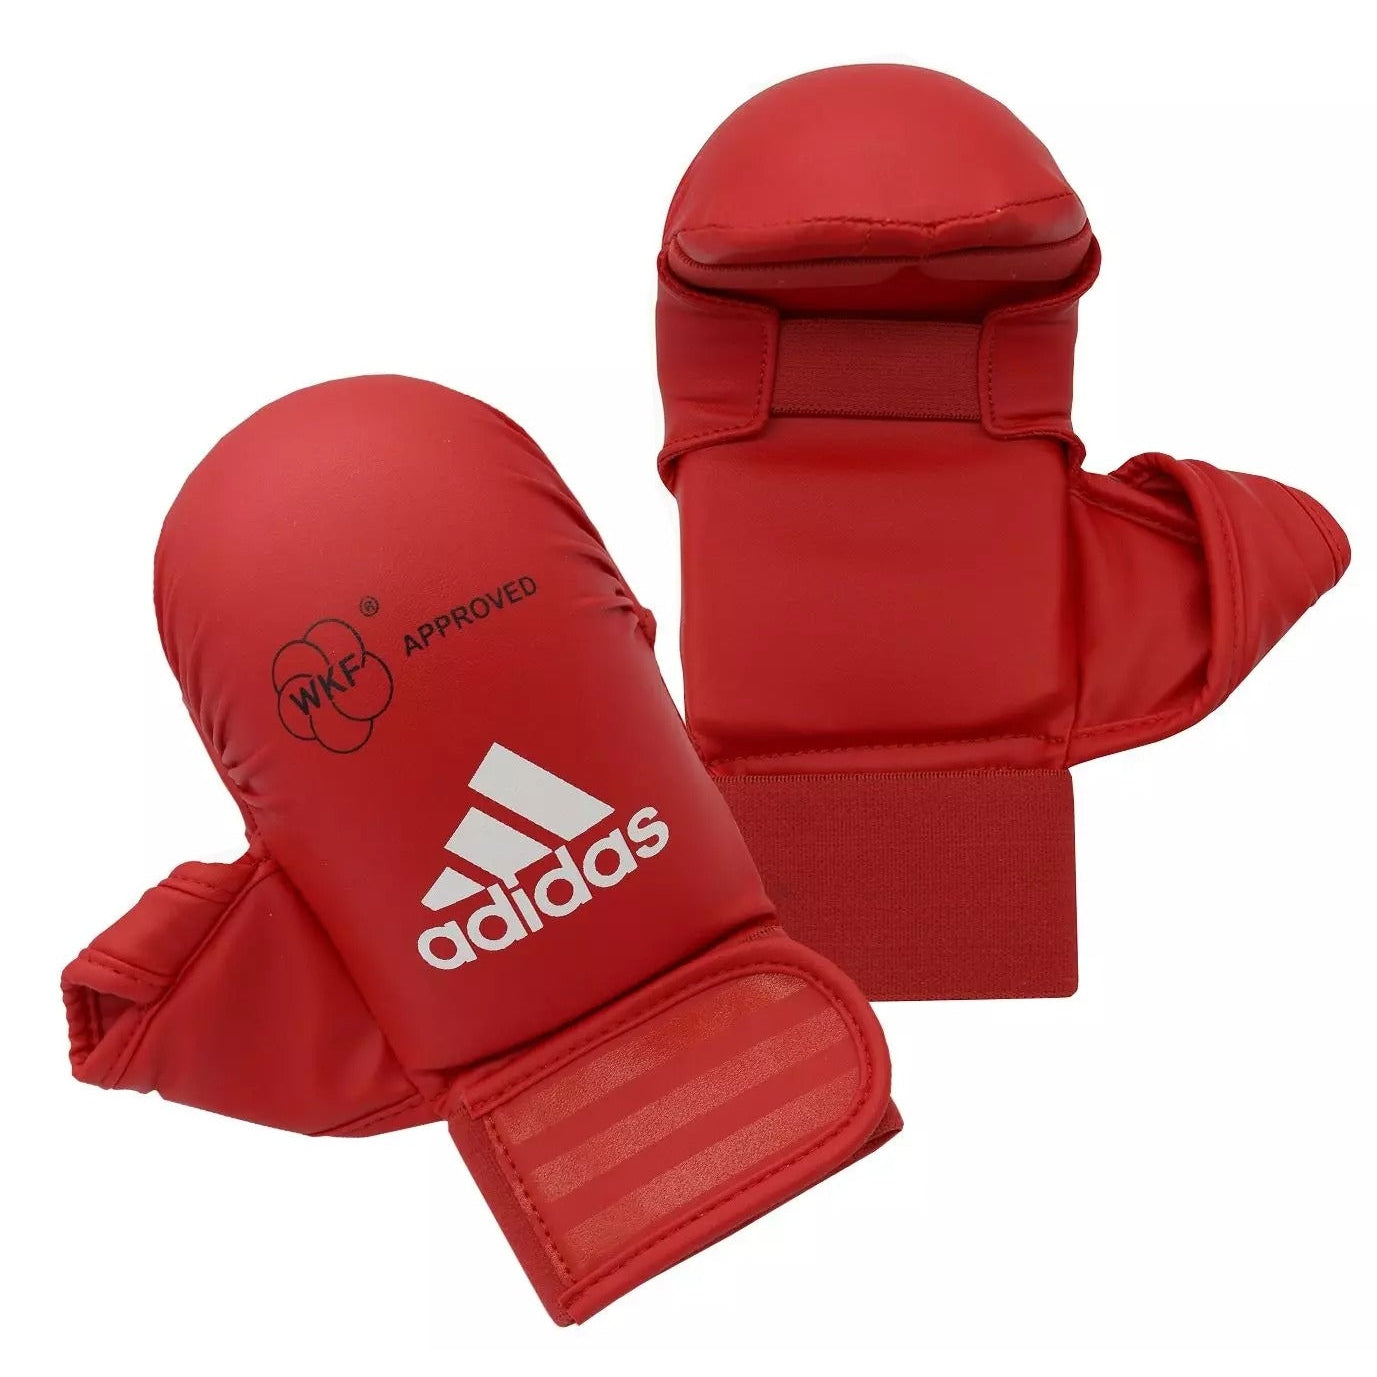 adidas Karate Mitts WKF Competition Gloves With Thumb - Budo Online